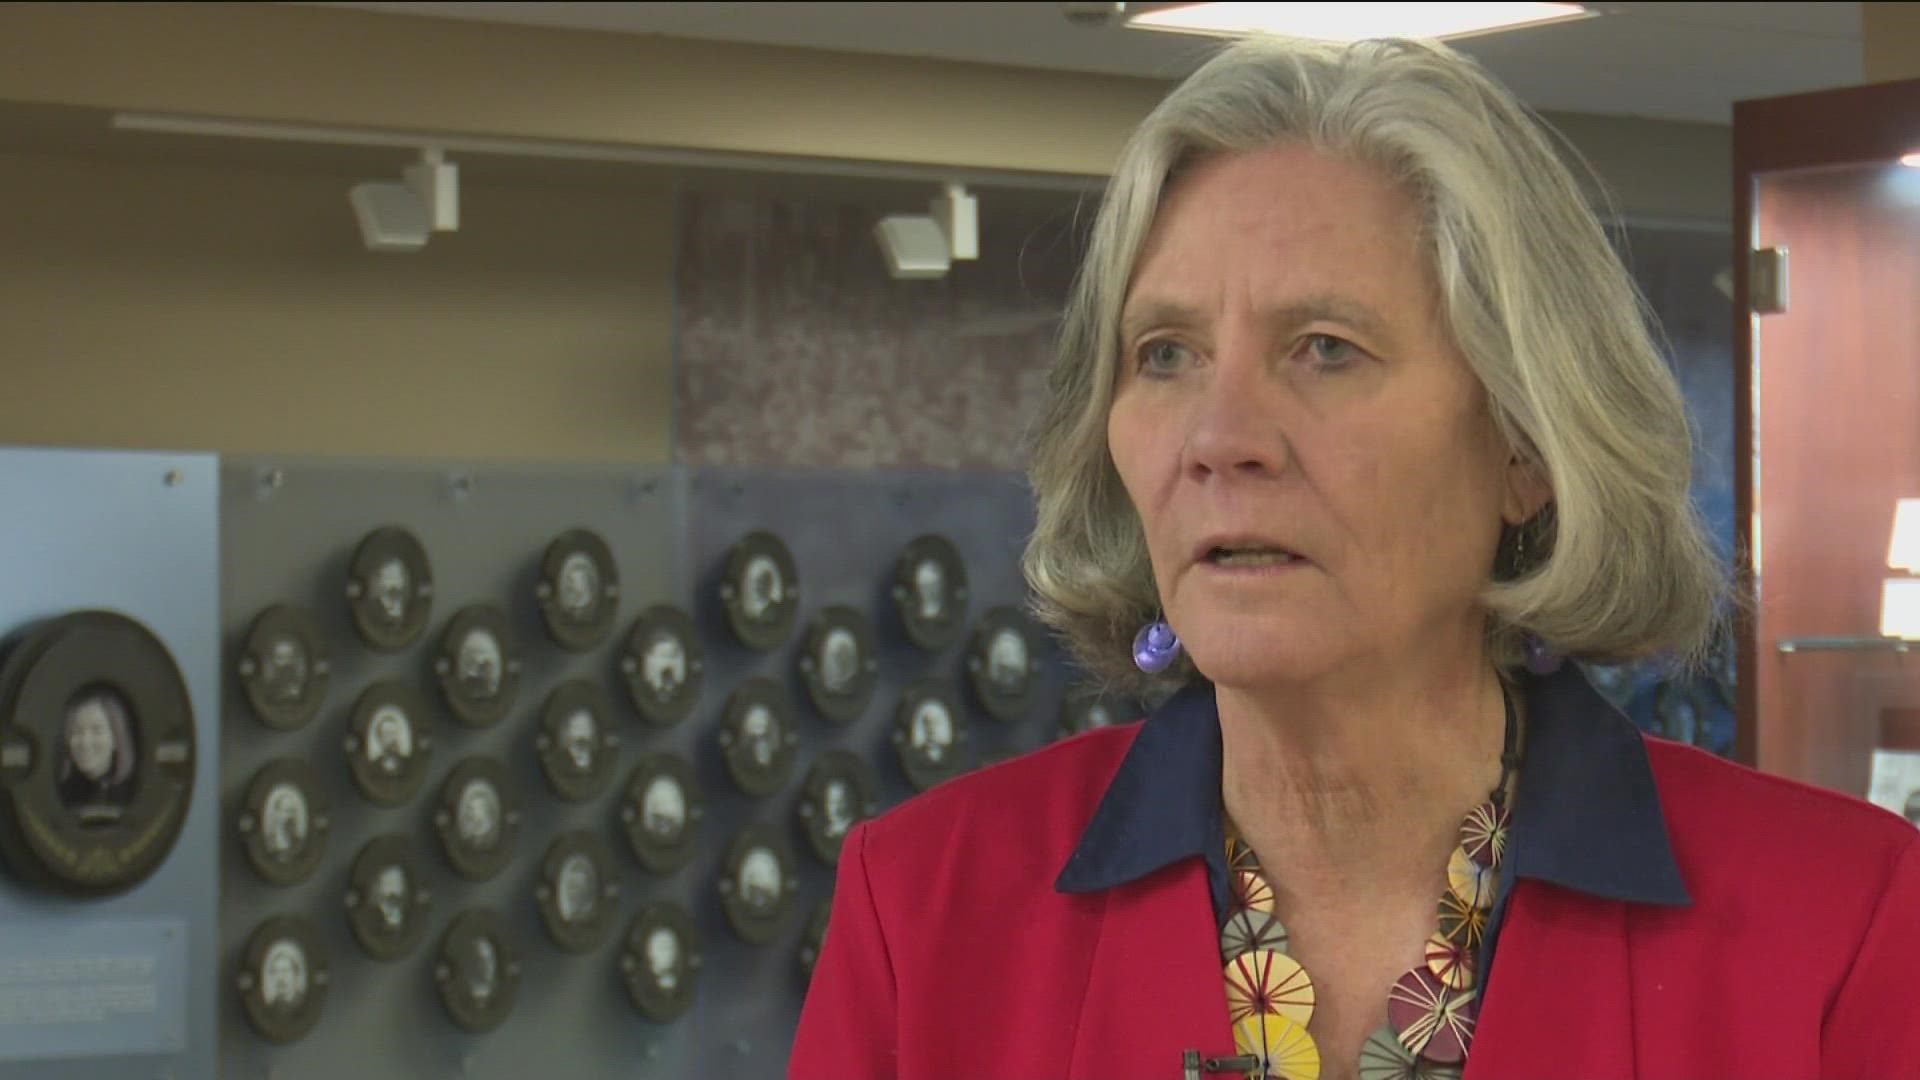 Elaine Clegg, the Boise City Council president, will step down from the council if she is confirmed by the VRT board on January 9.